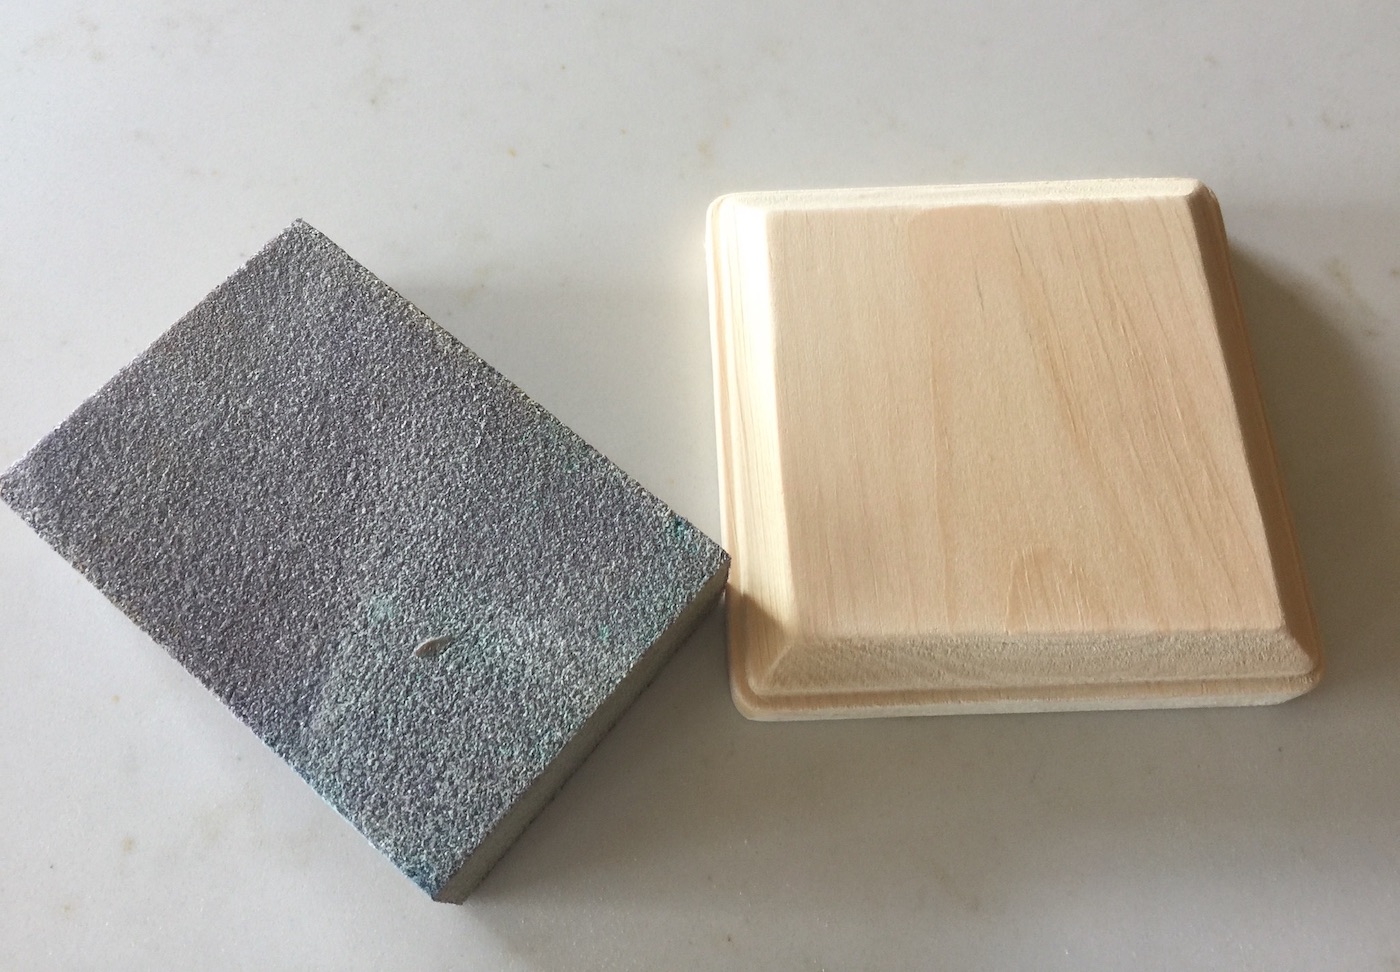 Smoothing out a wood plaque with a sanding block